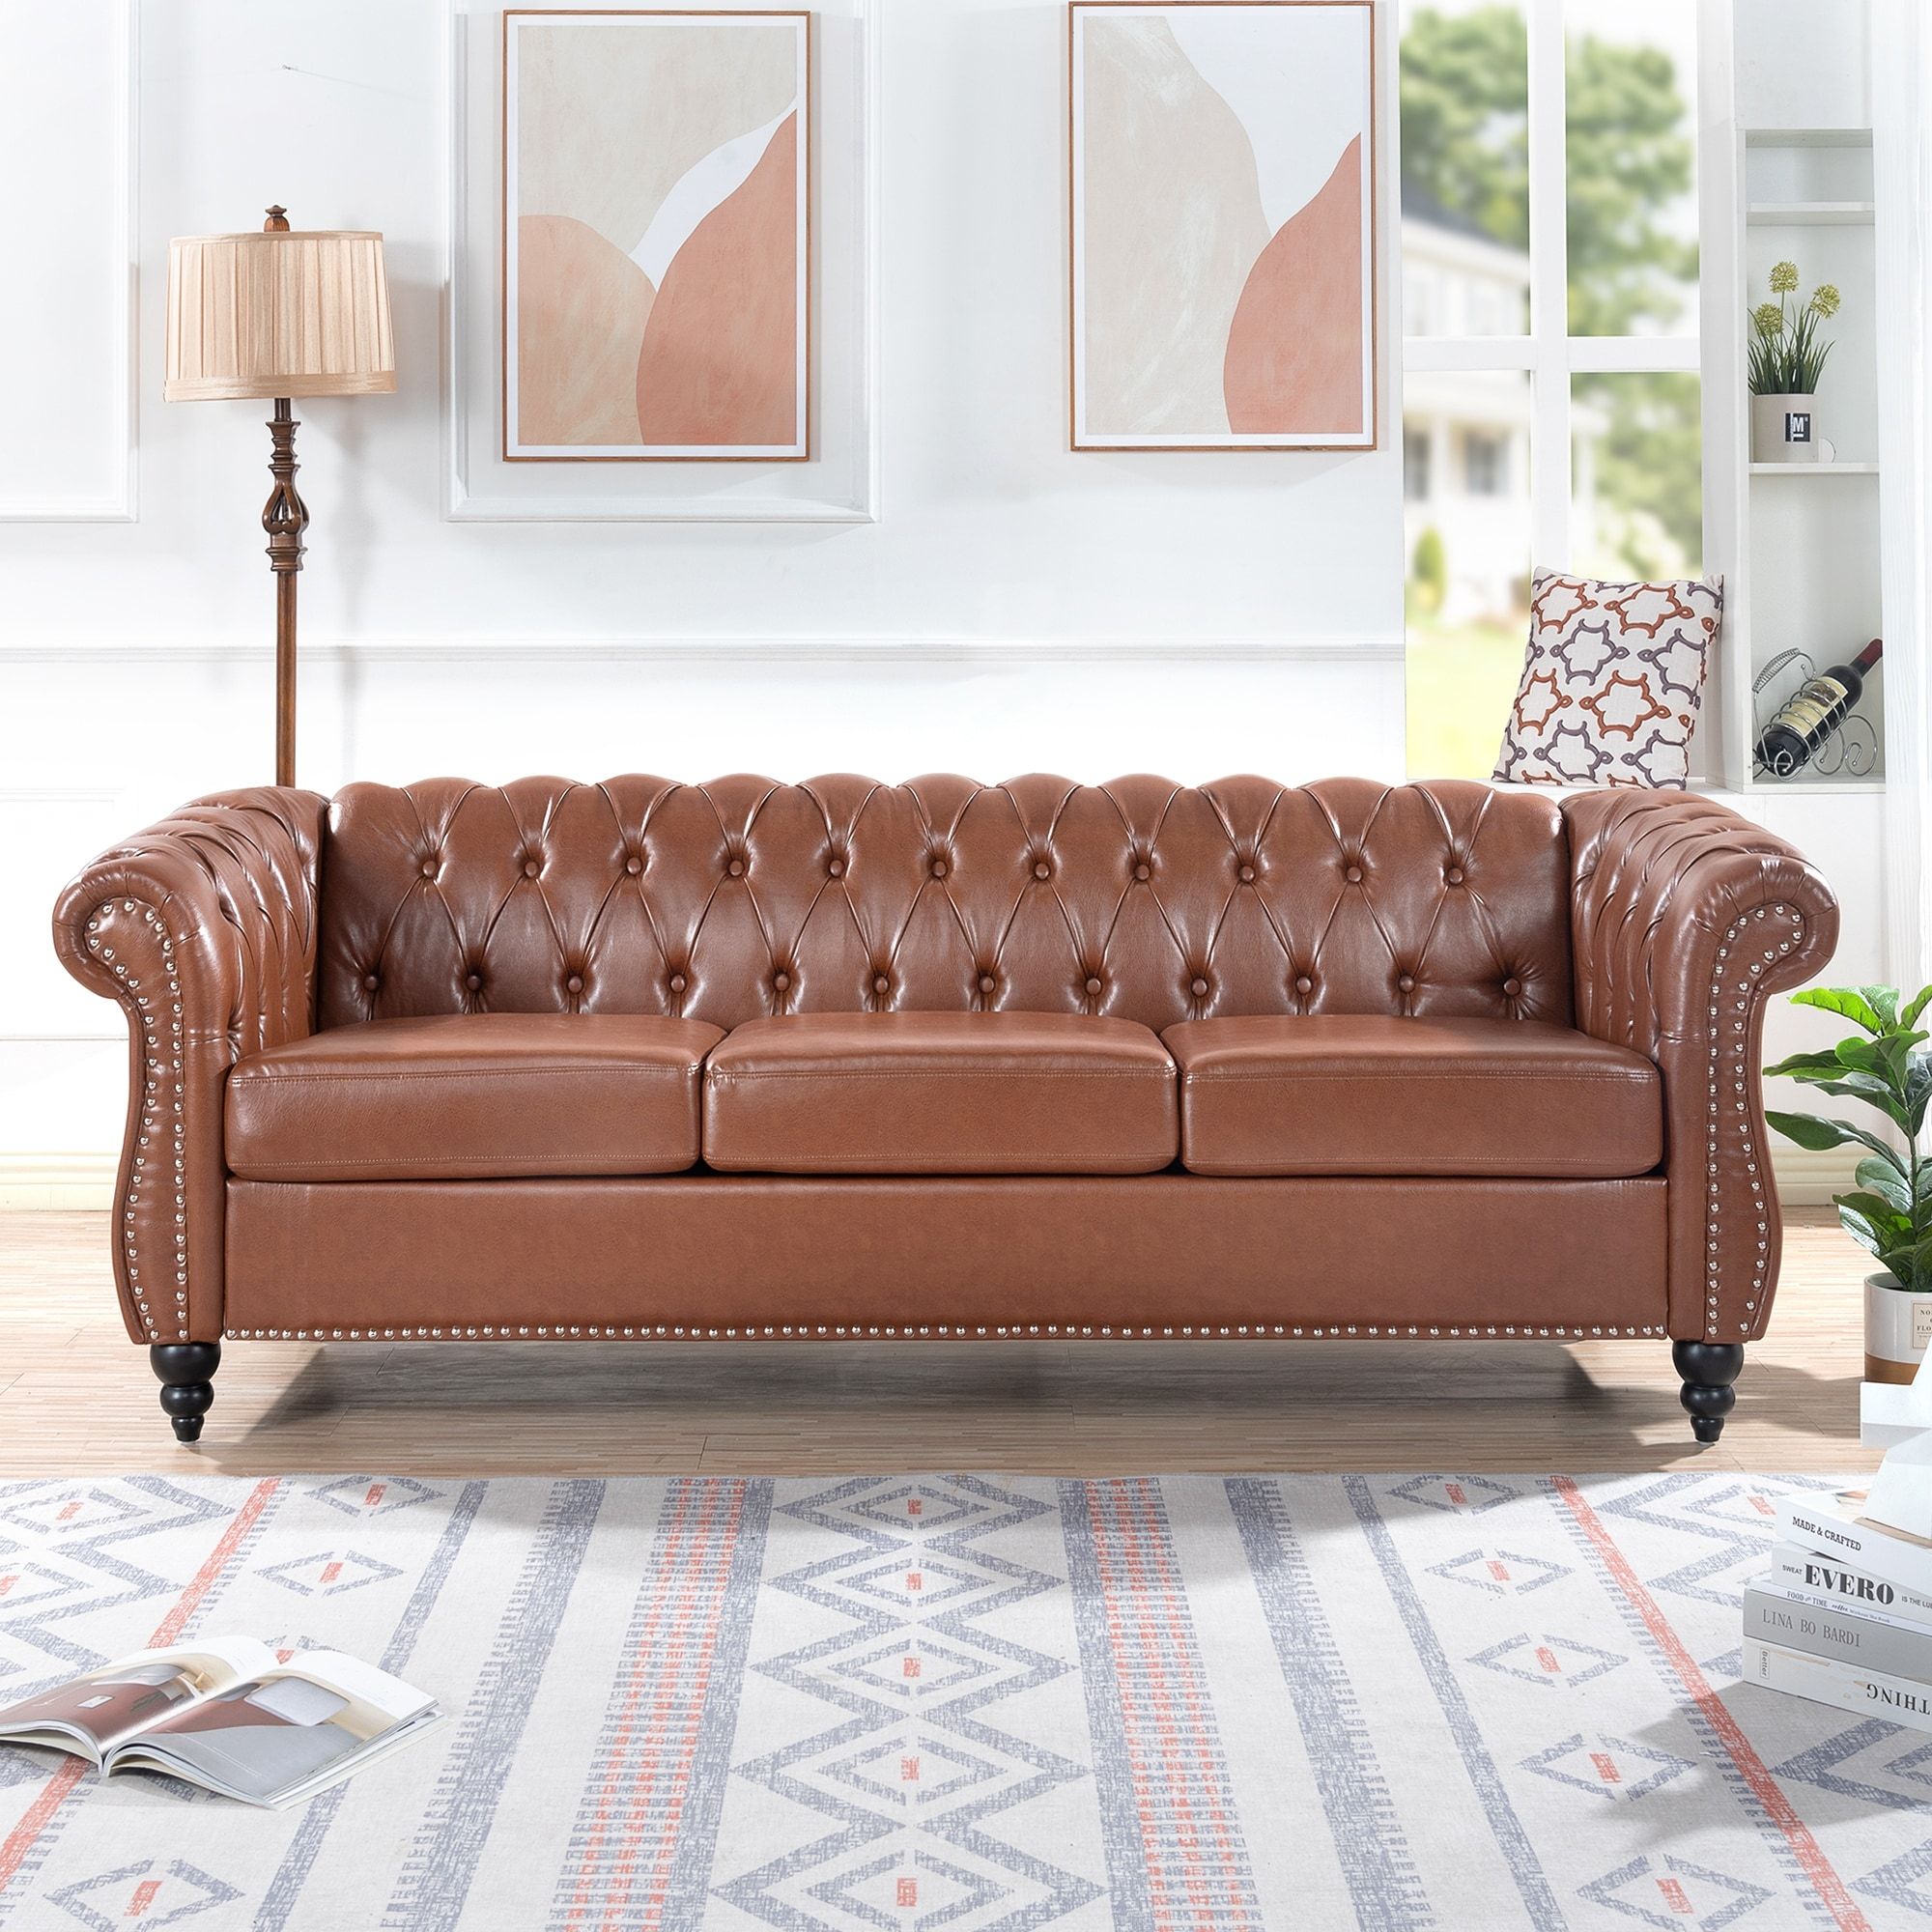 84.65" Traditional Chesterfield 3 Seater Sofa In Pu Leather, Nailheads  Decor – Bed Bath & Beyond – 37988395 Within Traditional 3 Seater Faux Leather Sofas (Photo 11 of 15)